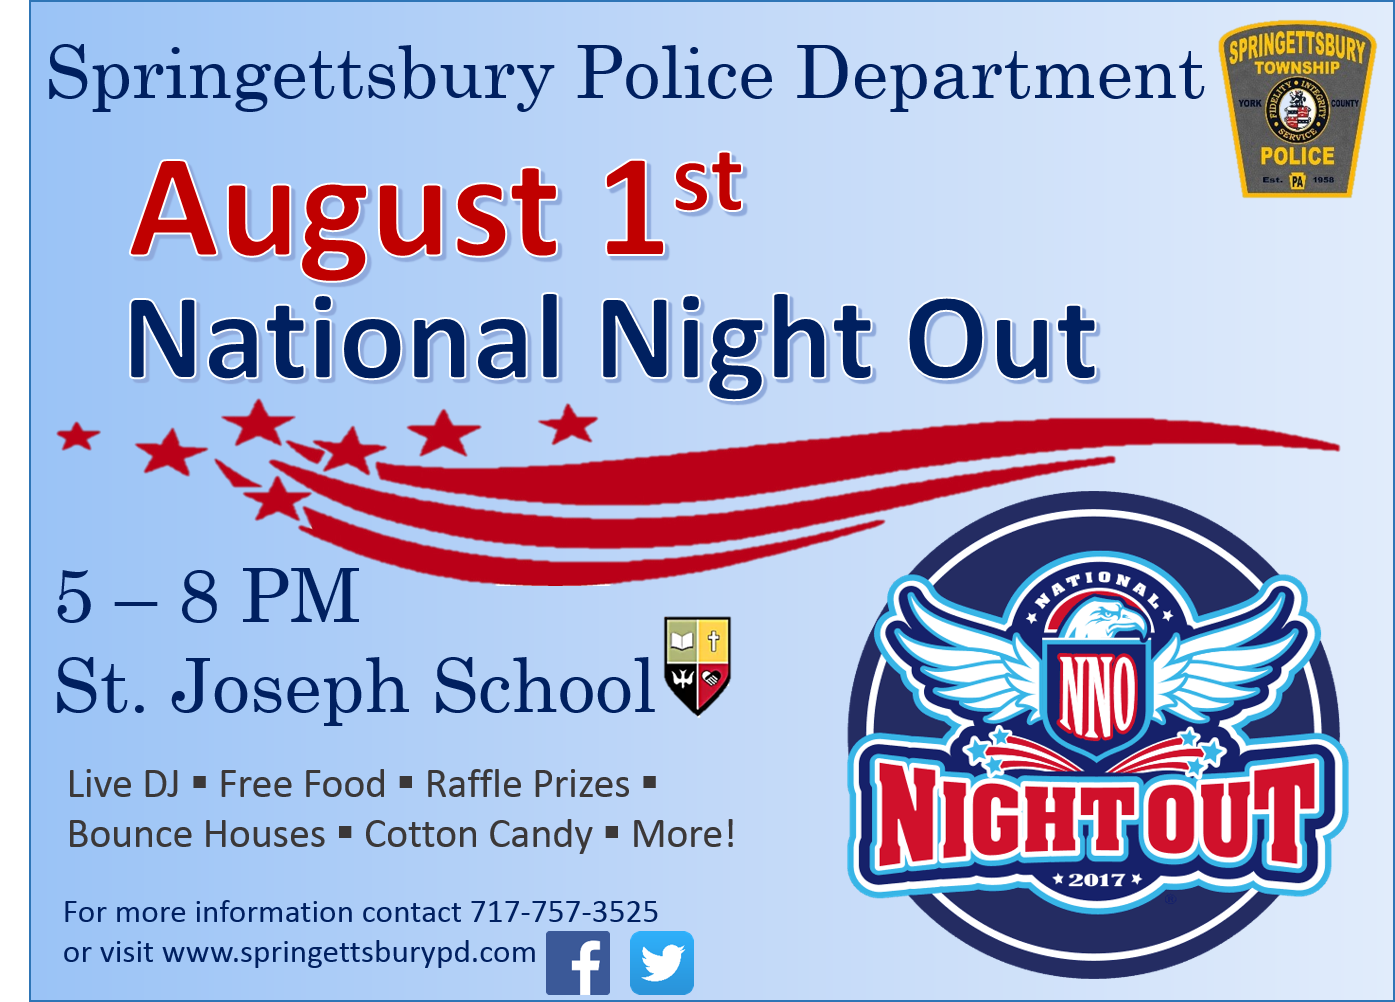 NATIONAL NIGHT OUT!